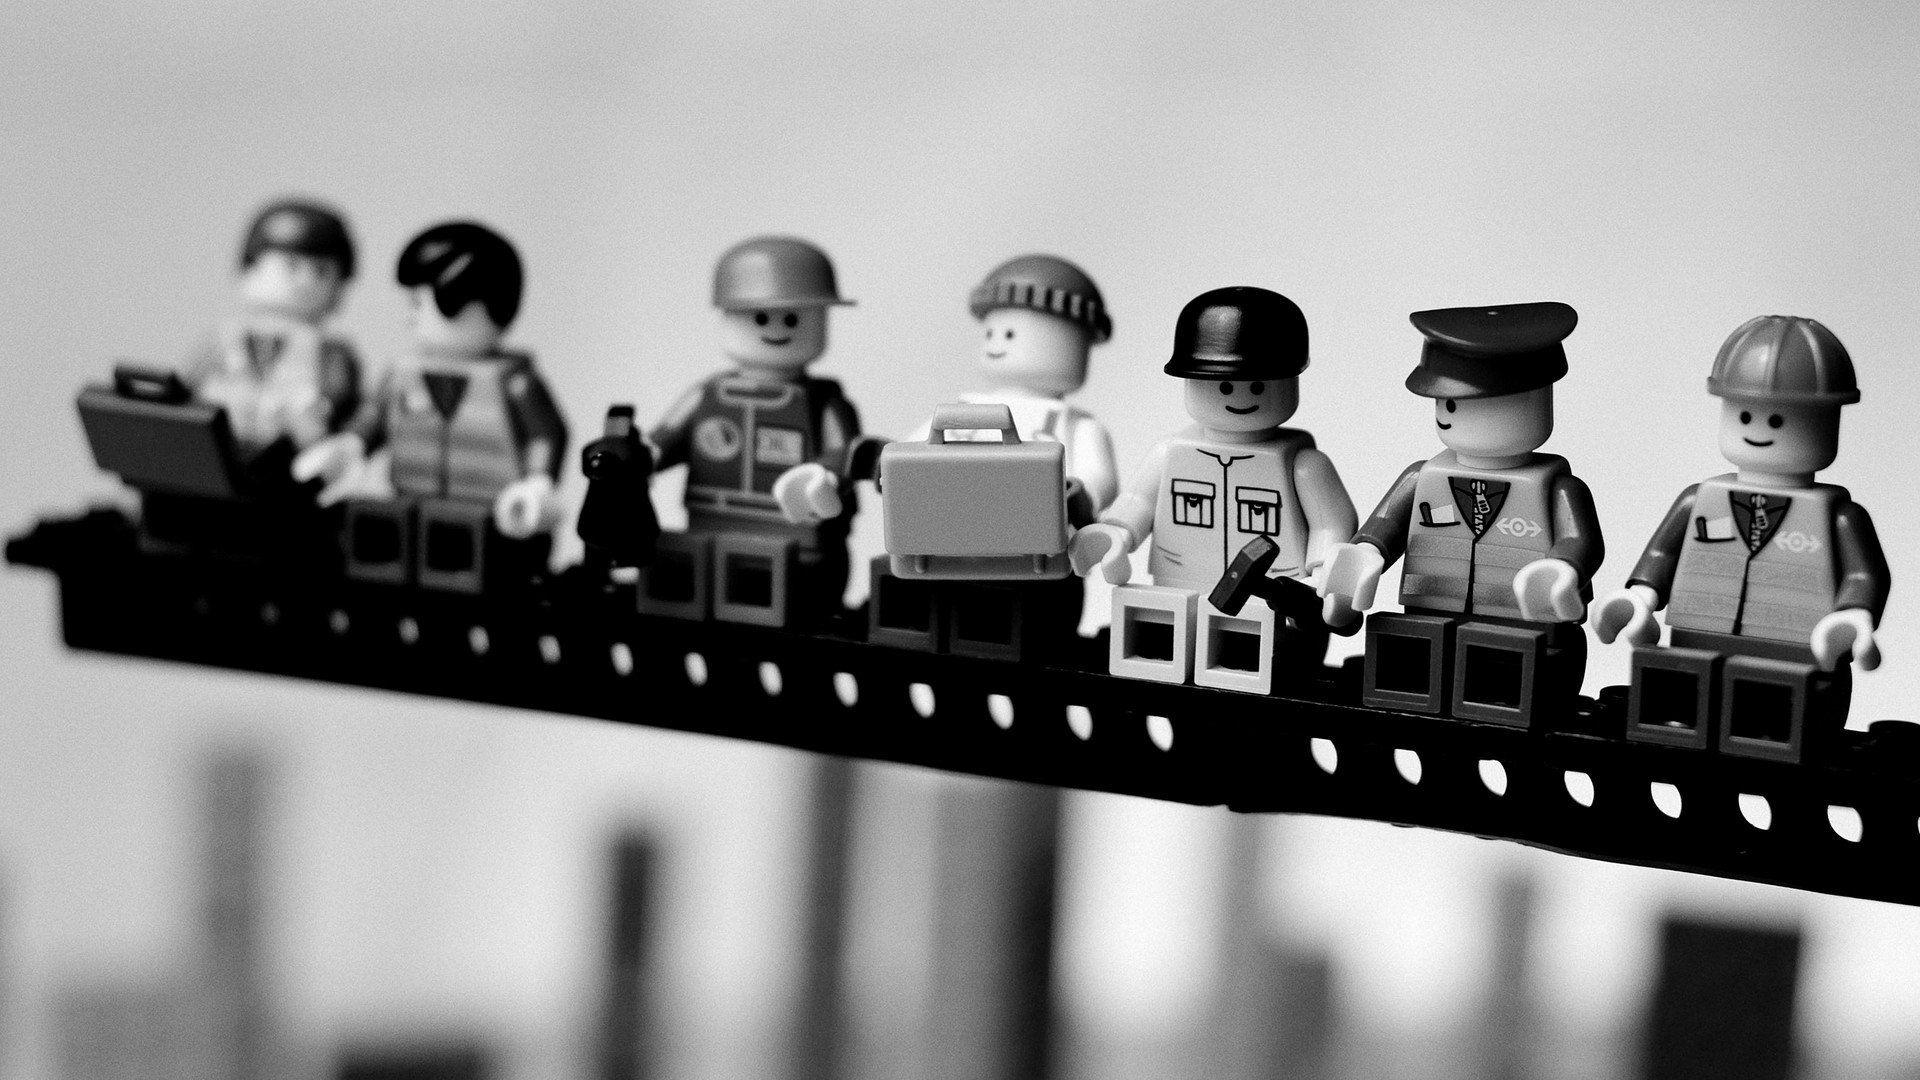 Lego Workers